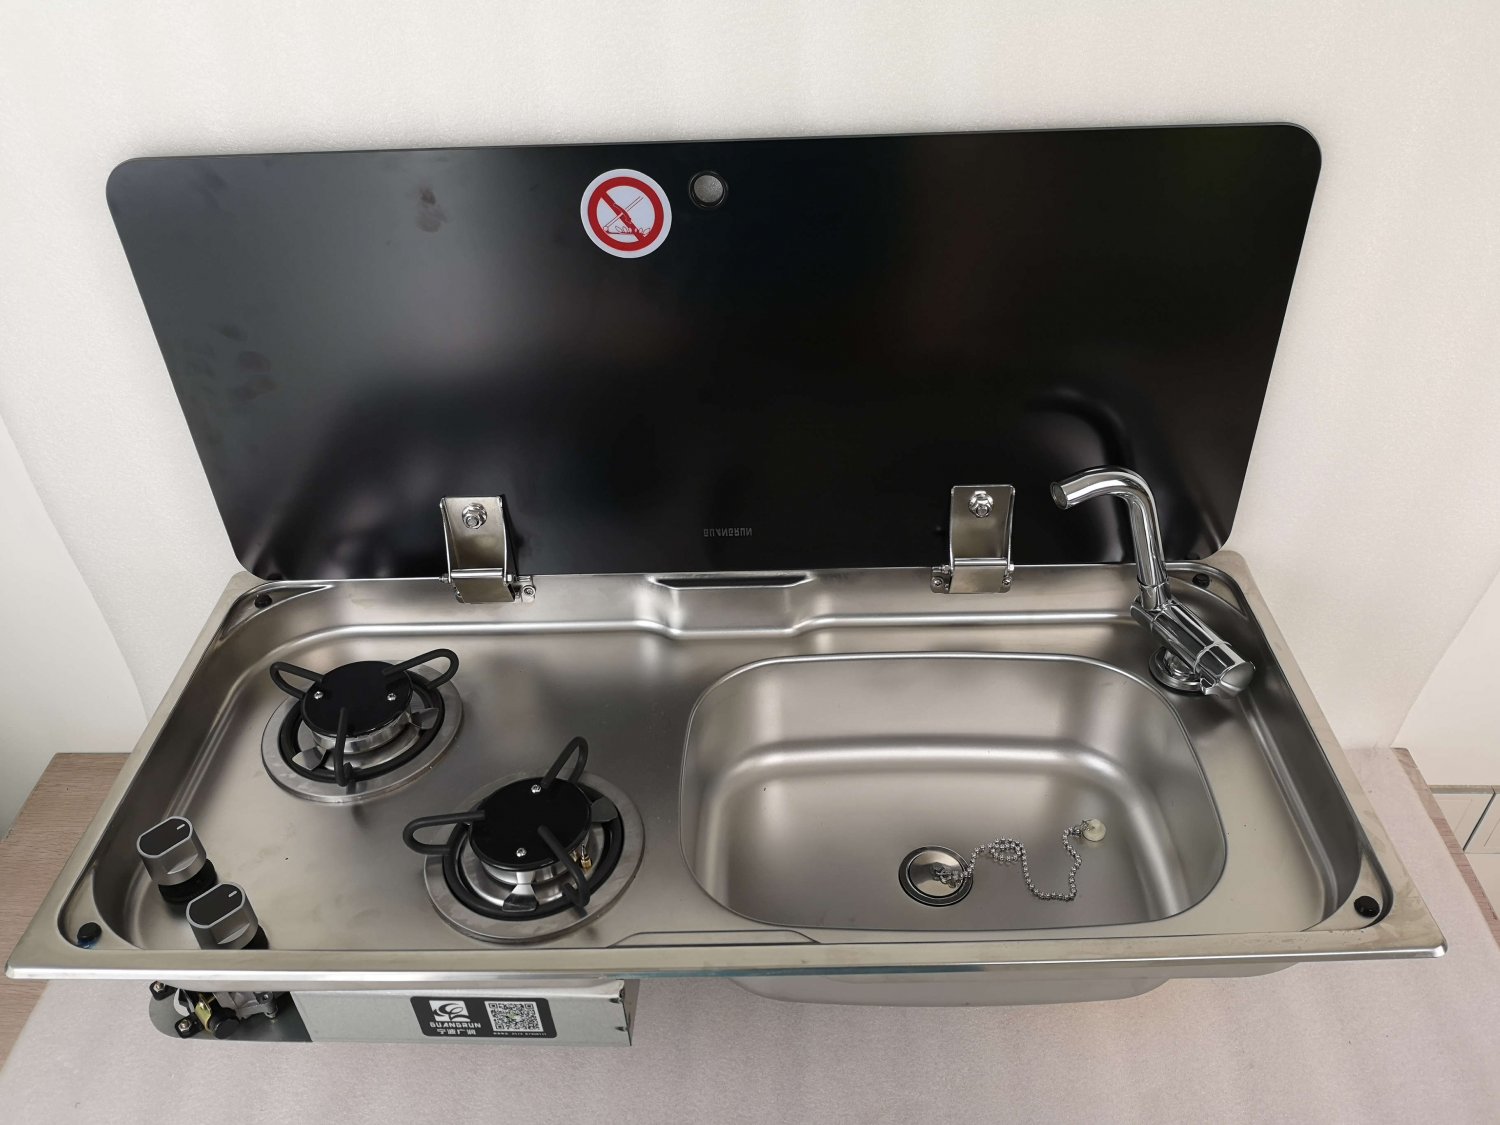 2 Burner Gas Stove Sink Combo with Glass Lid 2*1.8KW 775*365*150/120mm GR-904RS Boat RV